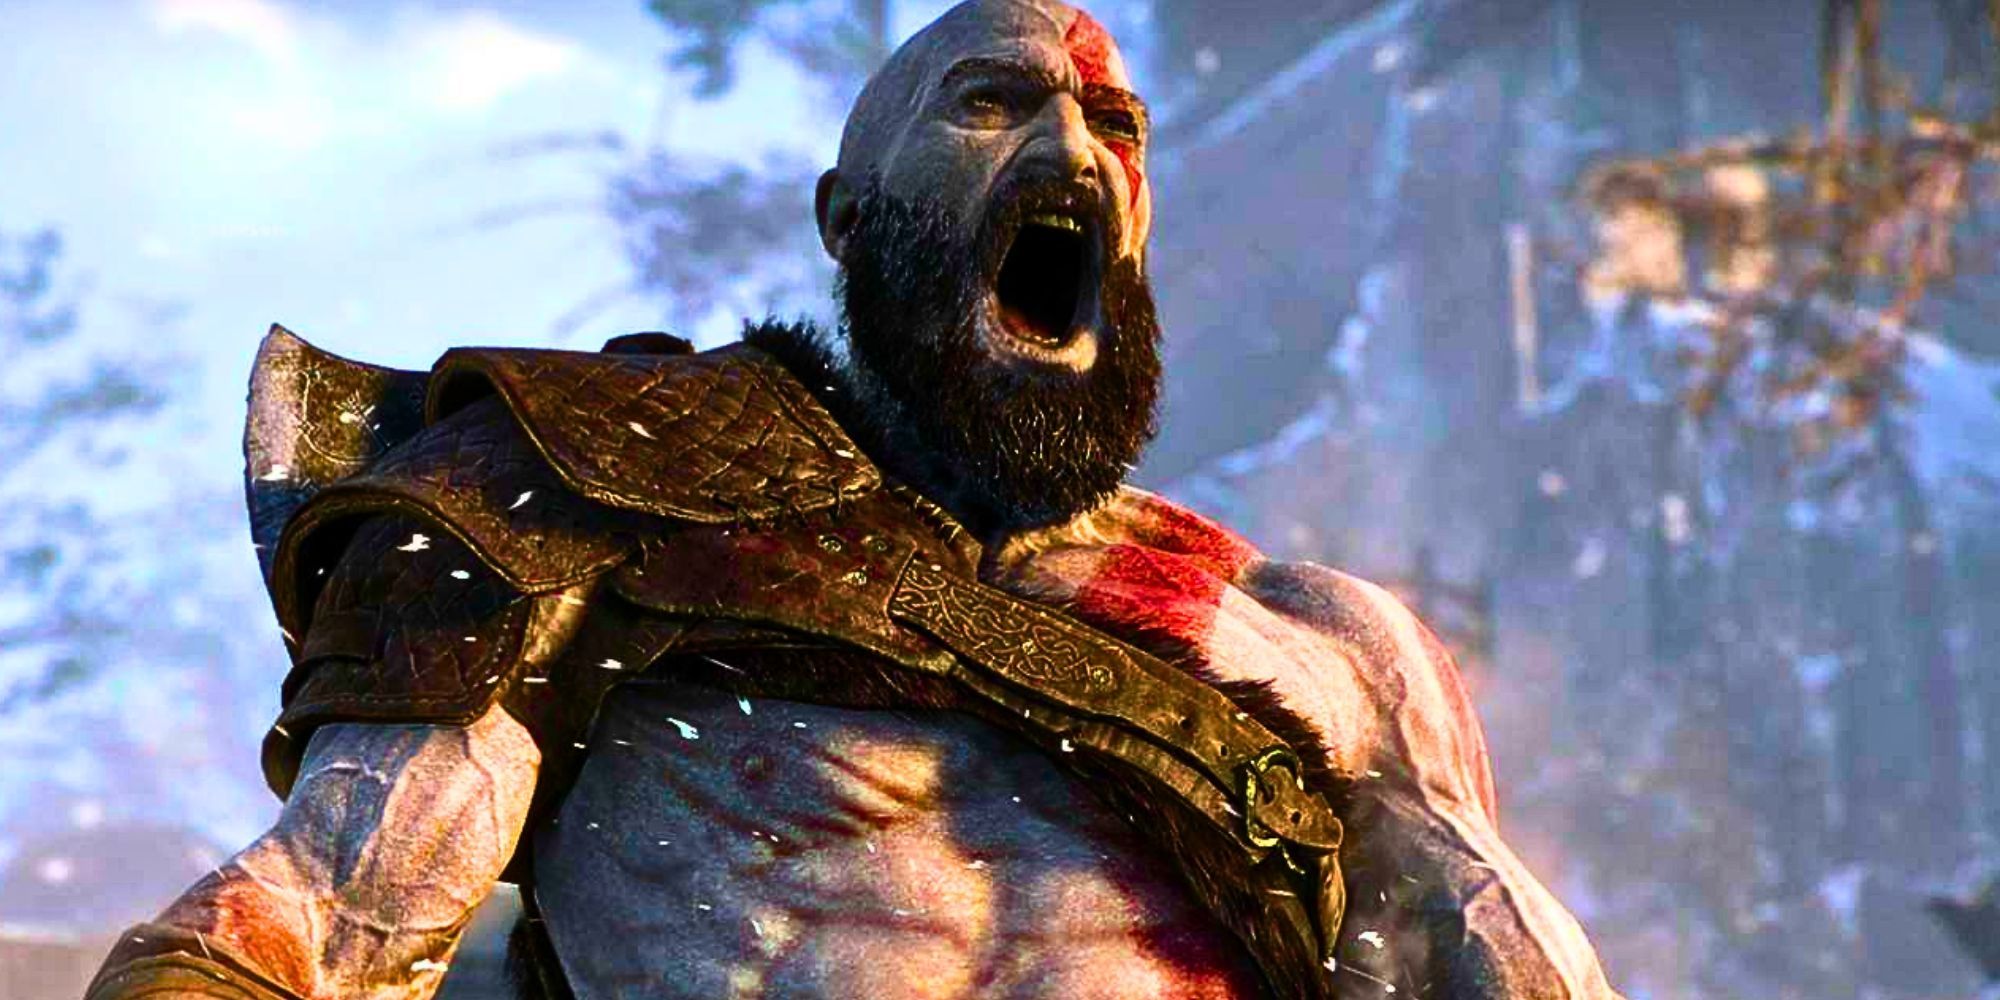 Kratos roaring with anger in God of War